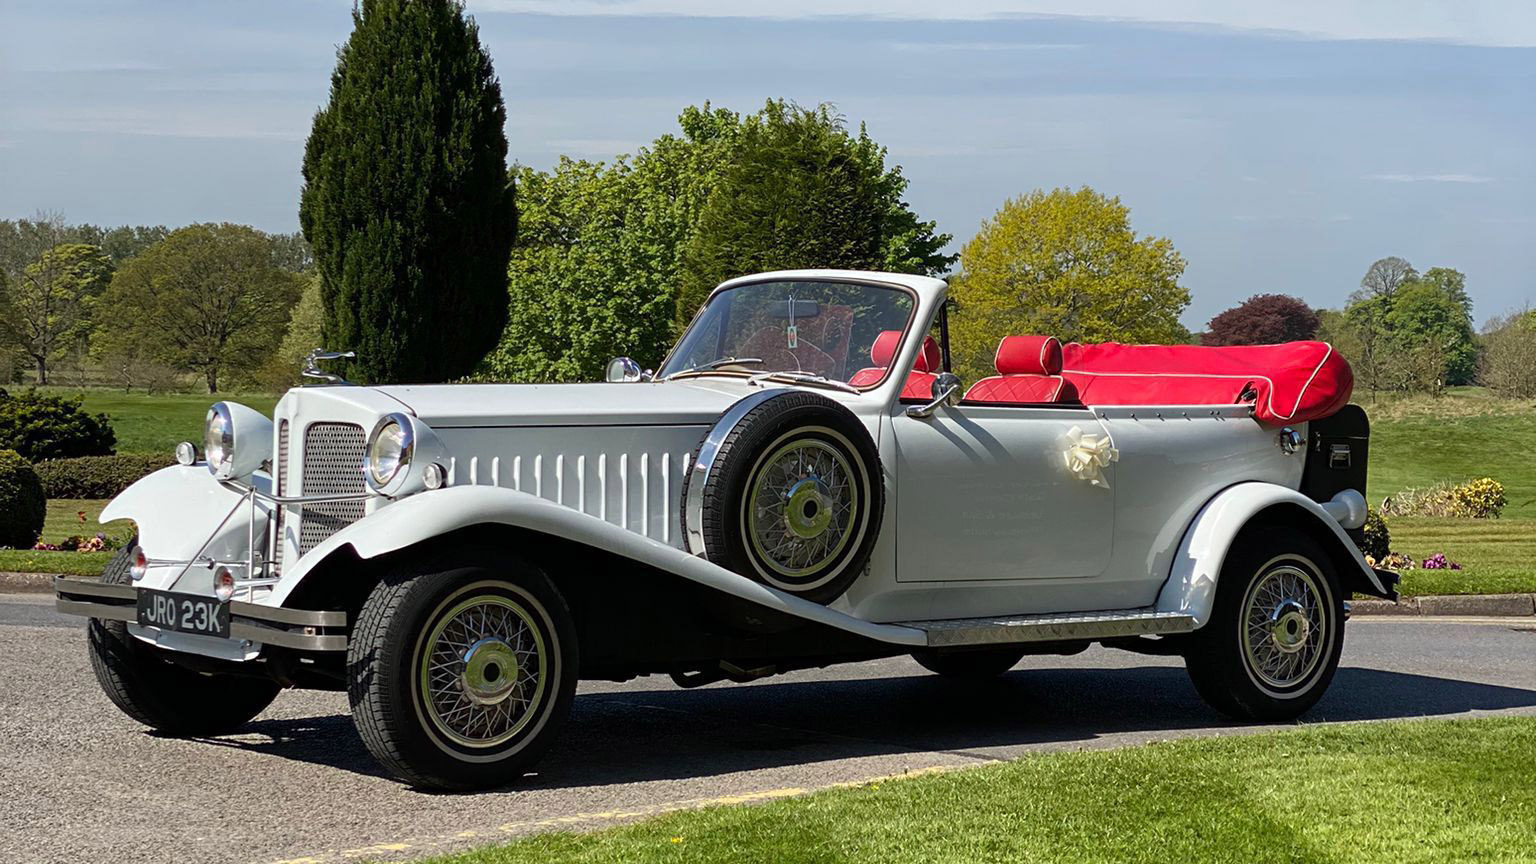 Front Side View of White EBauford Convertible with roof down showing the Red Leather interior and Mounted Spare wheel on left skirt of the vehicle